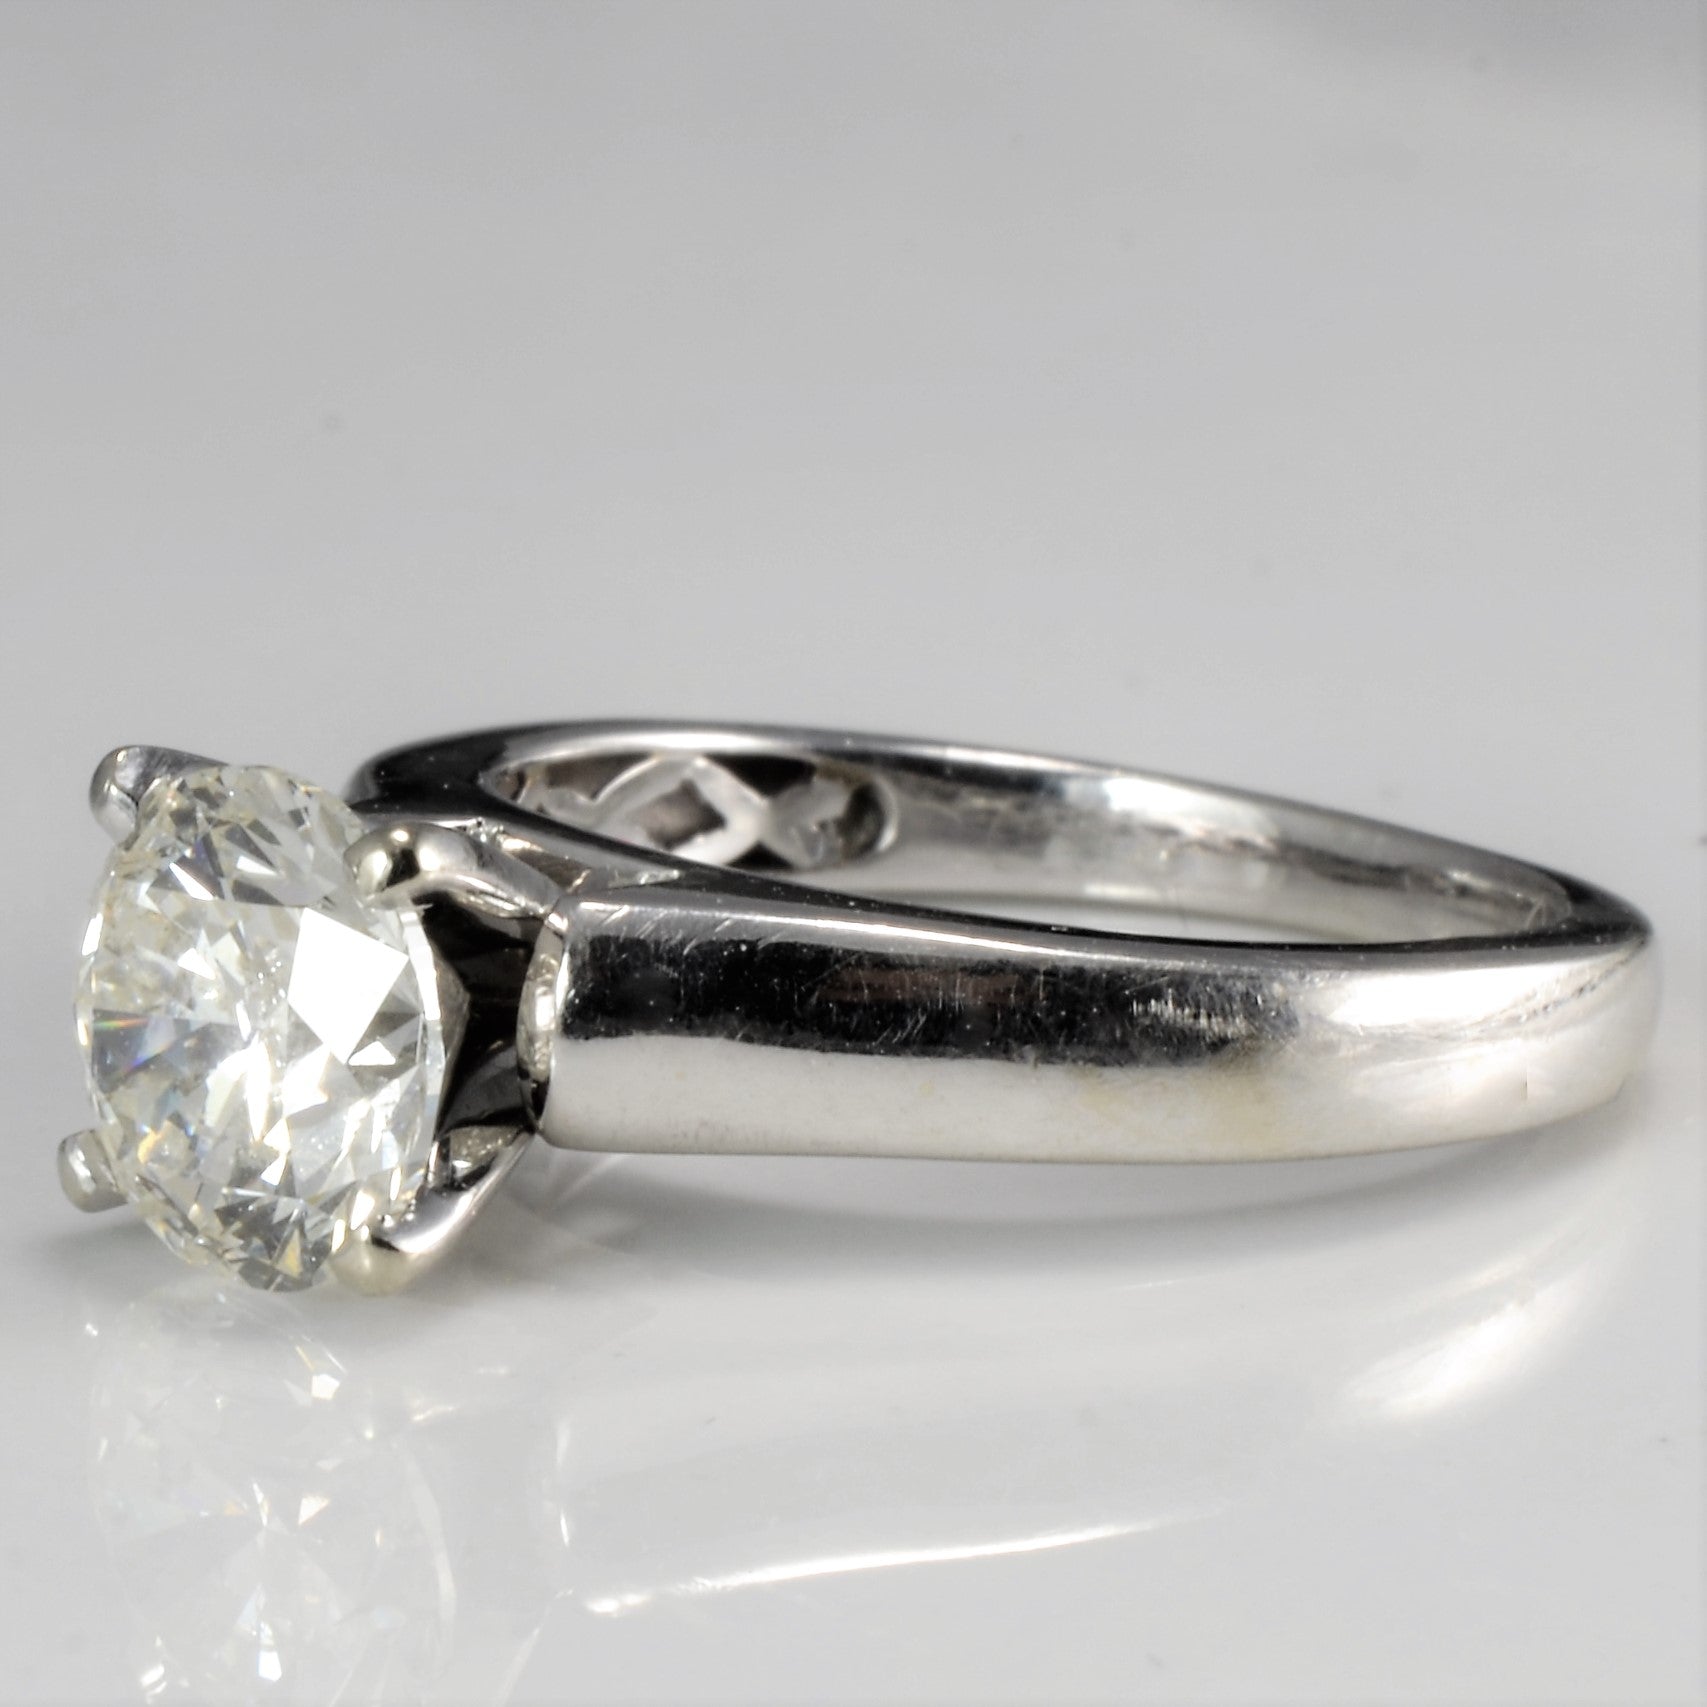 Wide Band Cathedral Solitaire Diamond Ring | 1.72 ct, SZ 5.75 | SI2 H |